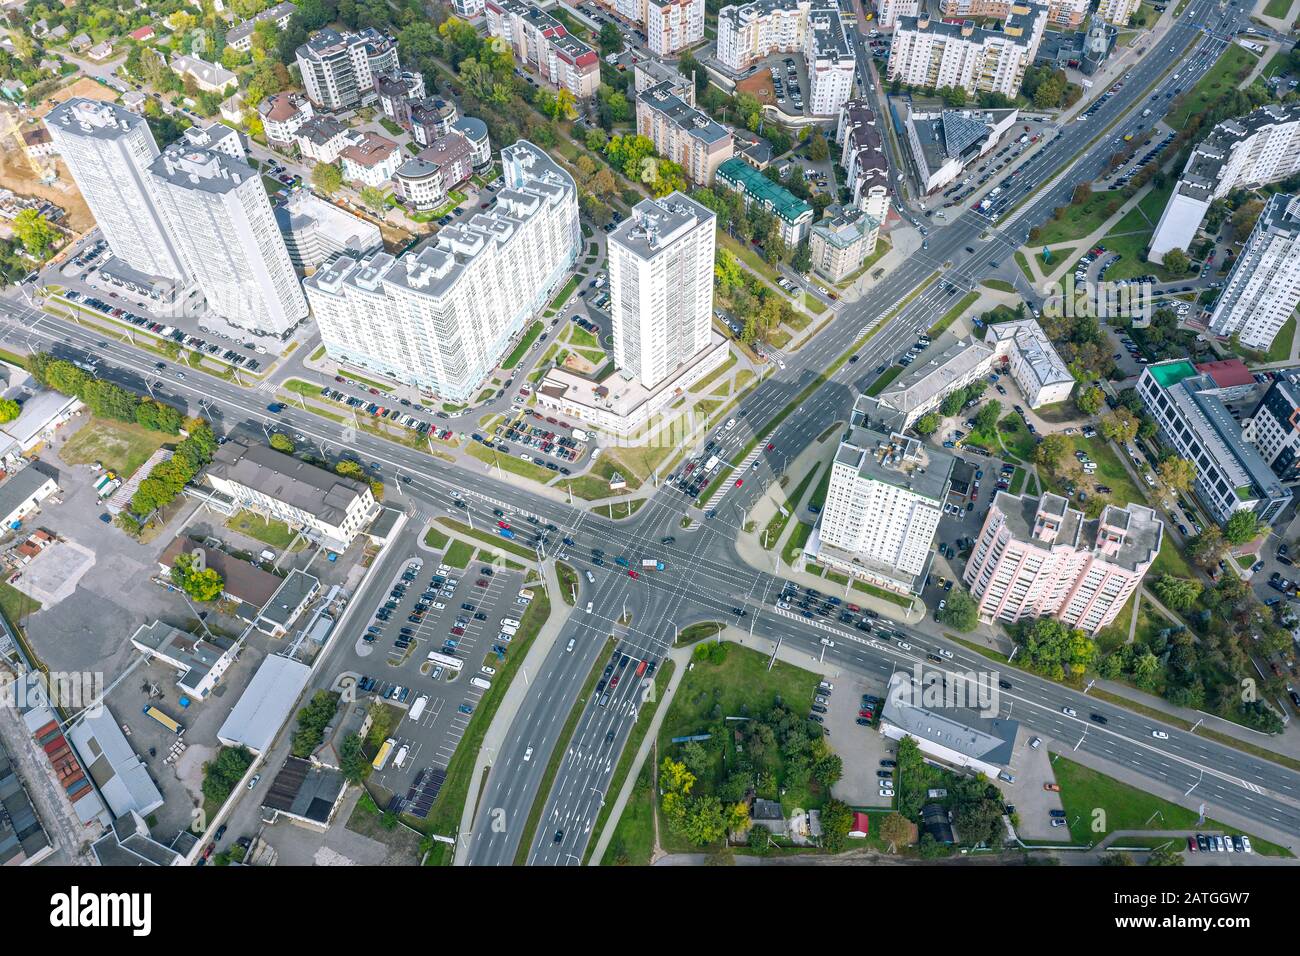 aerial view of residential district with apartment buildings and road intersection with car movement Stock Photo